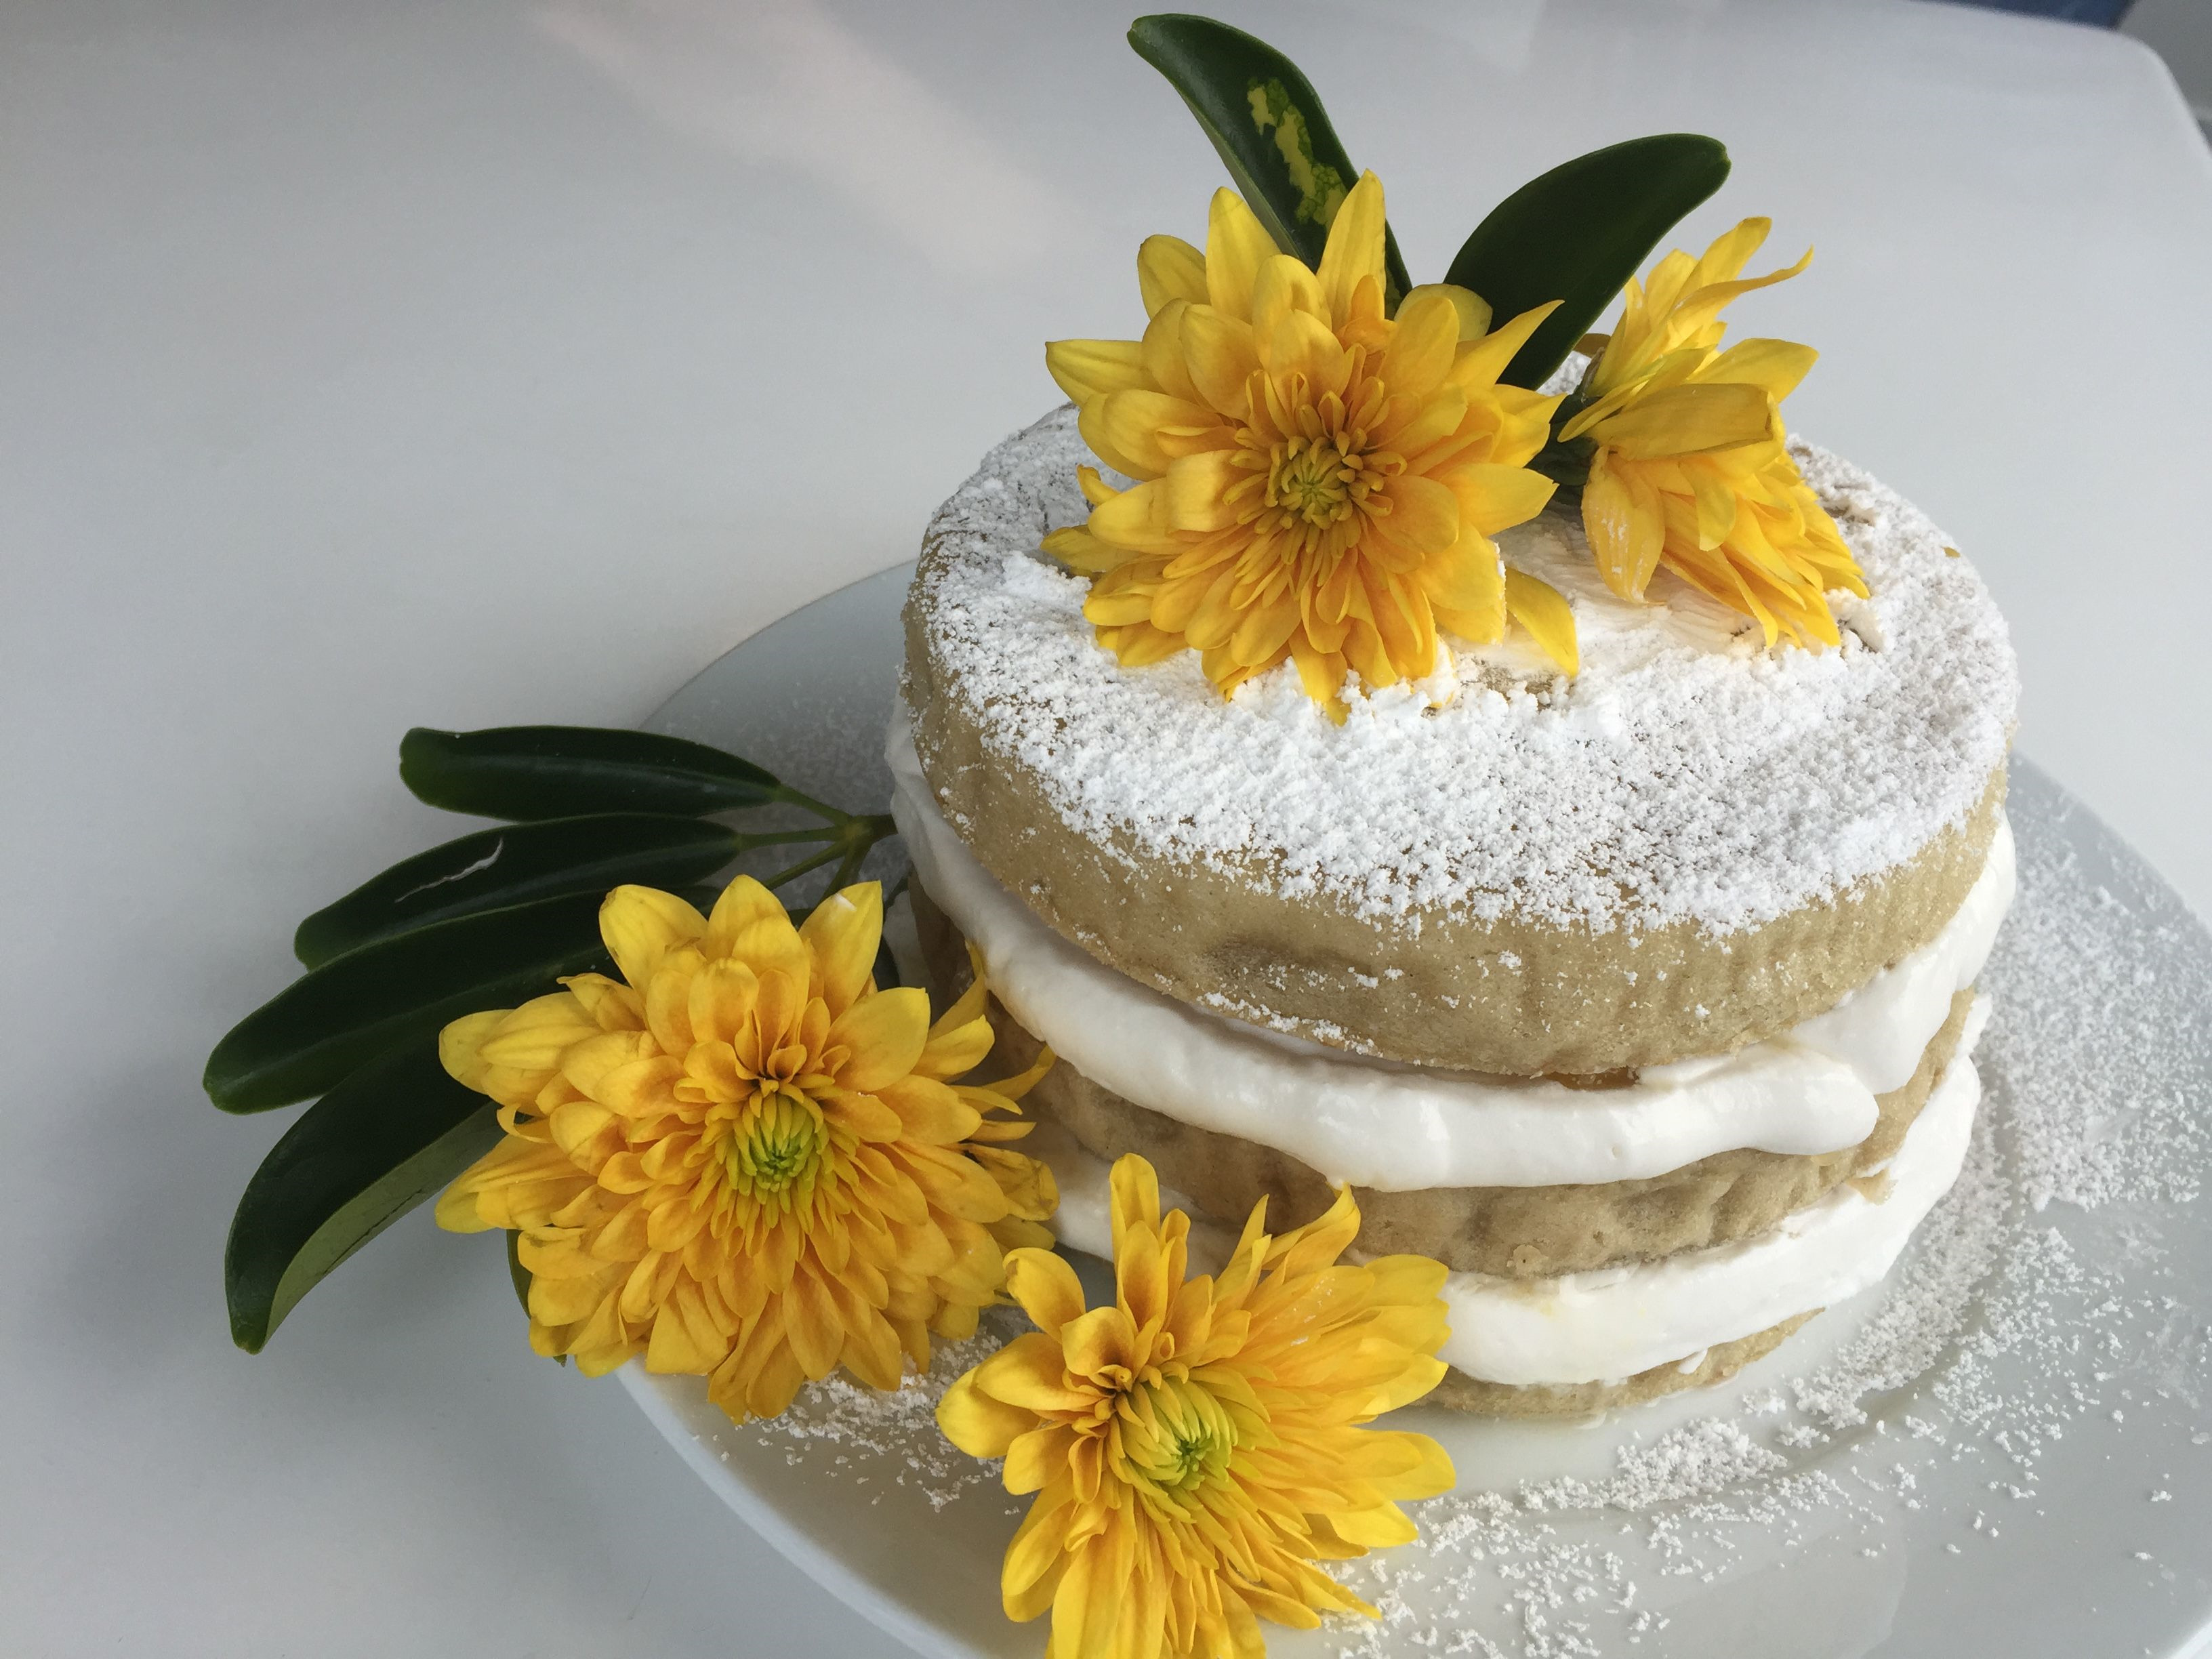 Vegan and Gluten-Free Naked Cake with Peaches and Coconut Cream